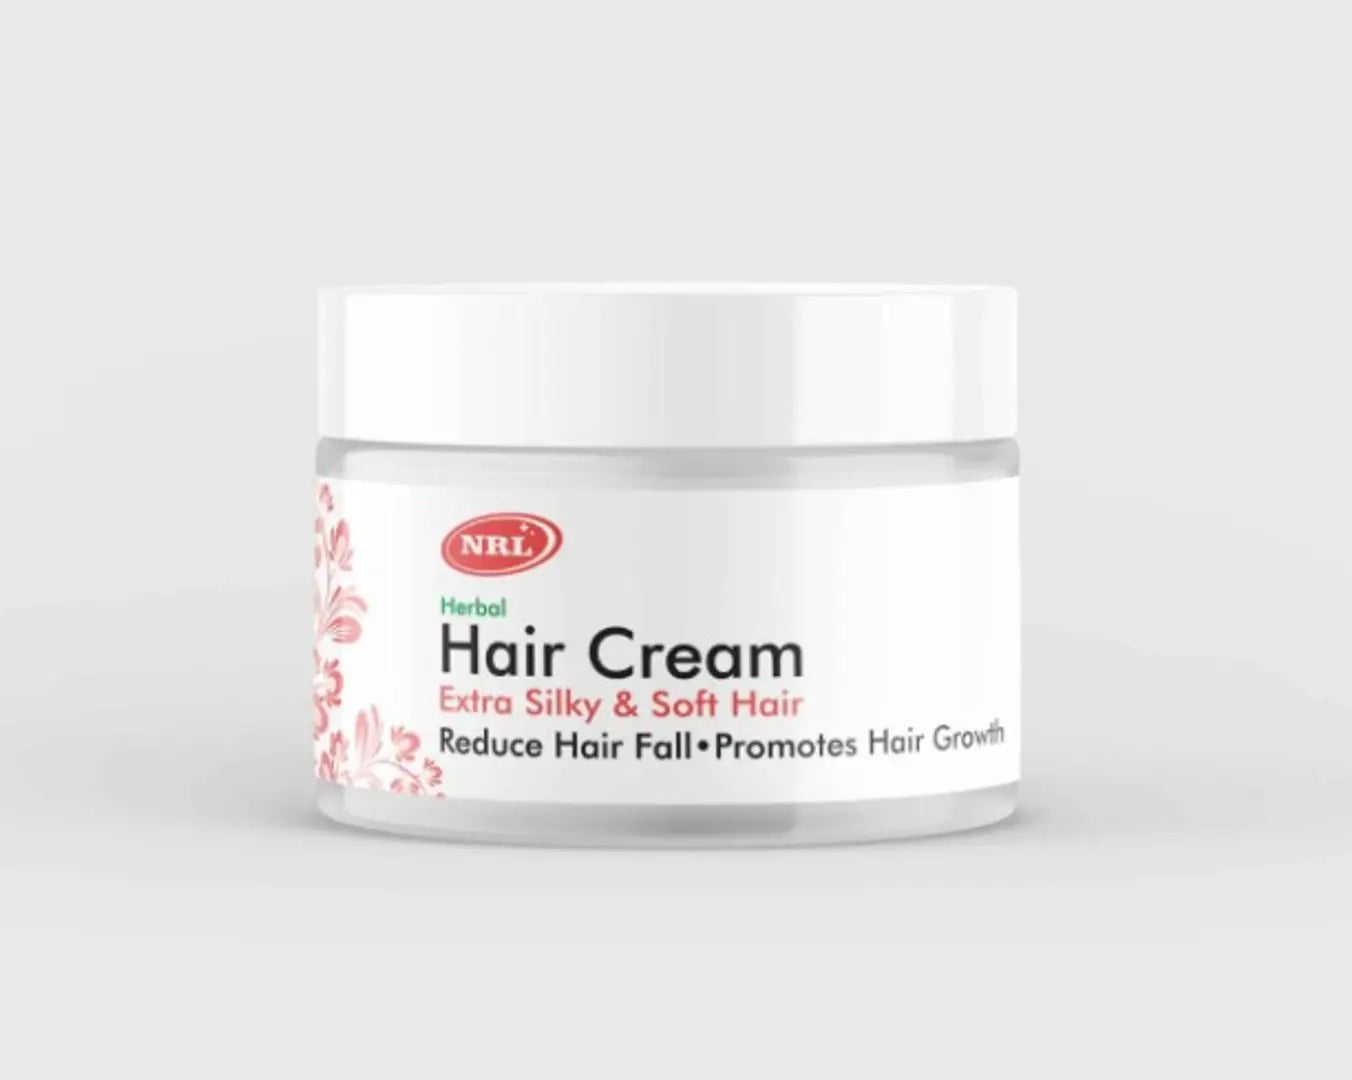 Hair Cream Pack Of One